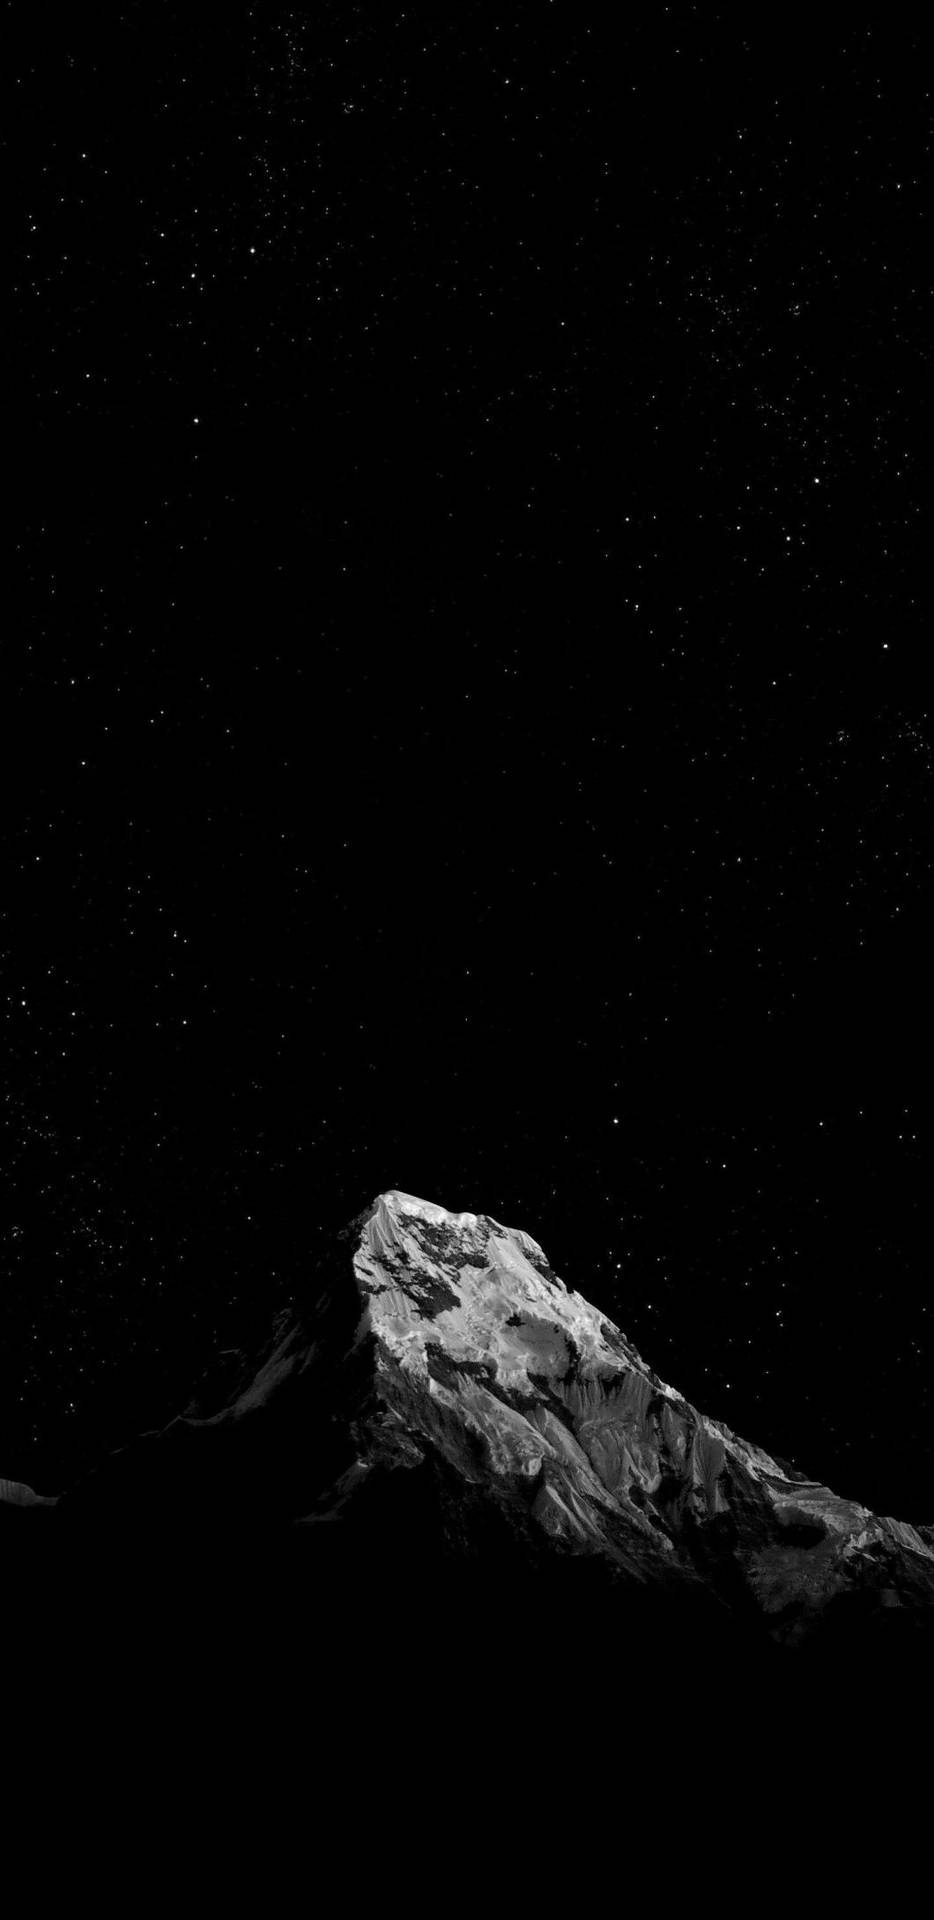 Peak Of A Mountain Oled Iphone Background